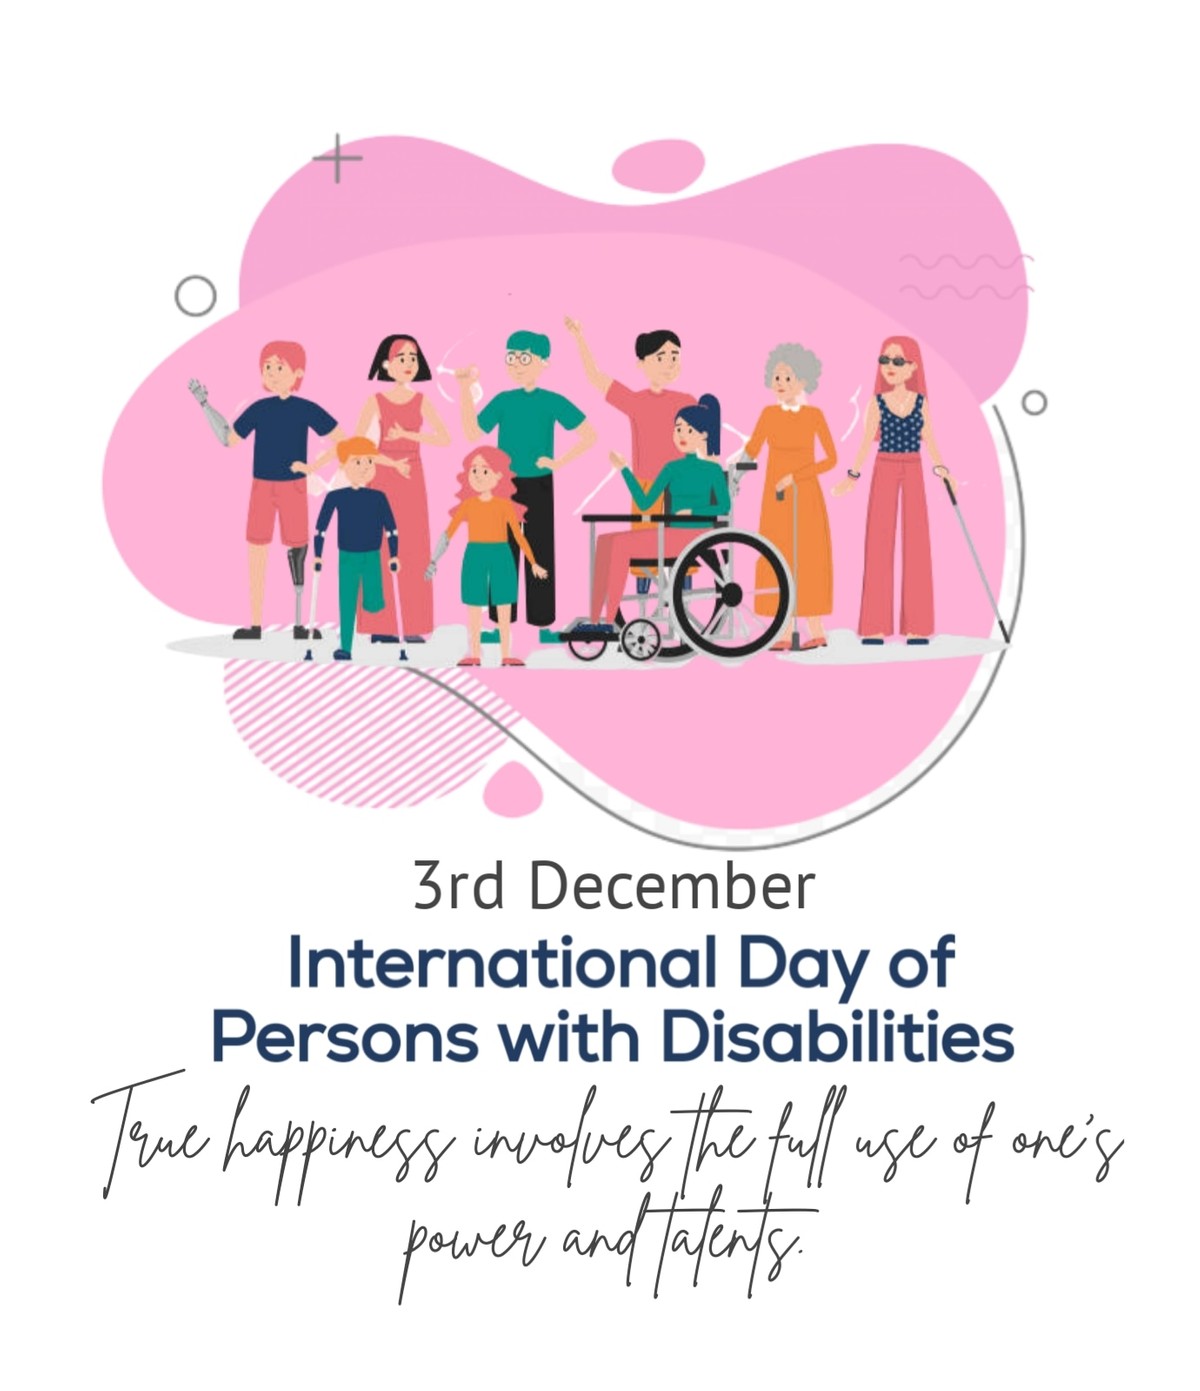 This is a design for the international day of disable people. this is a way of putting smiles on their faces